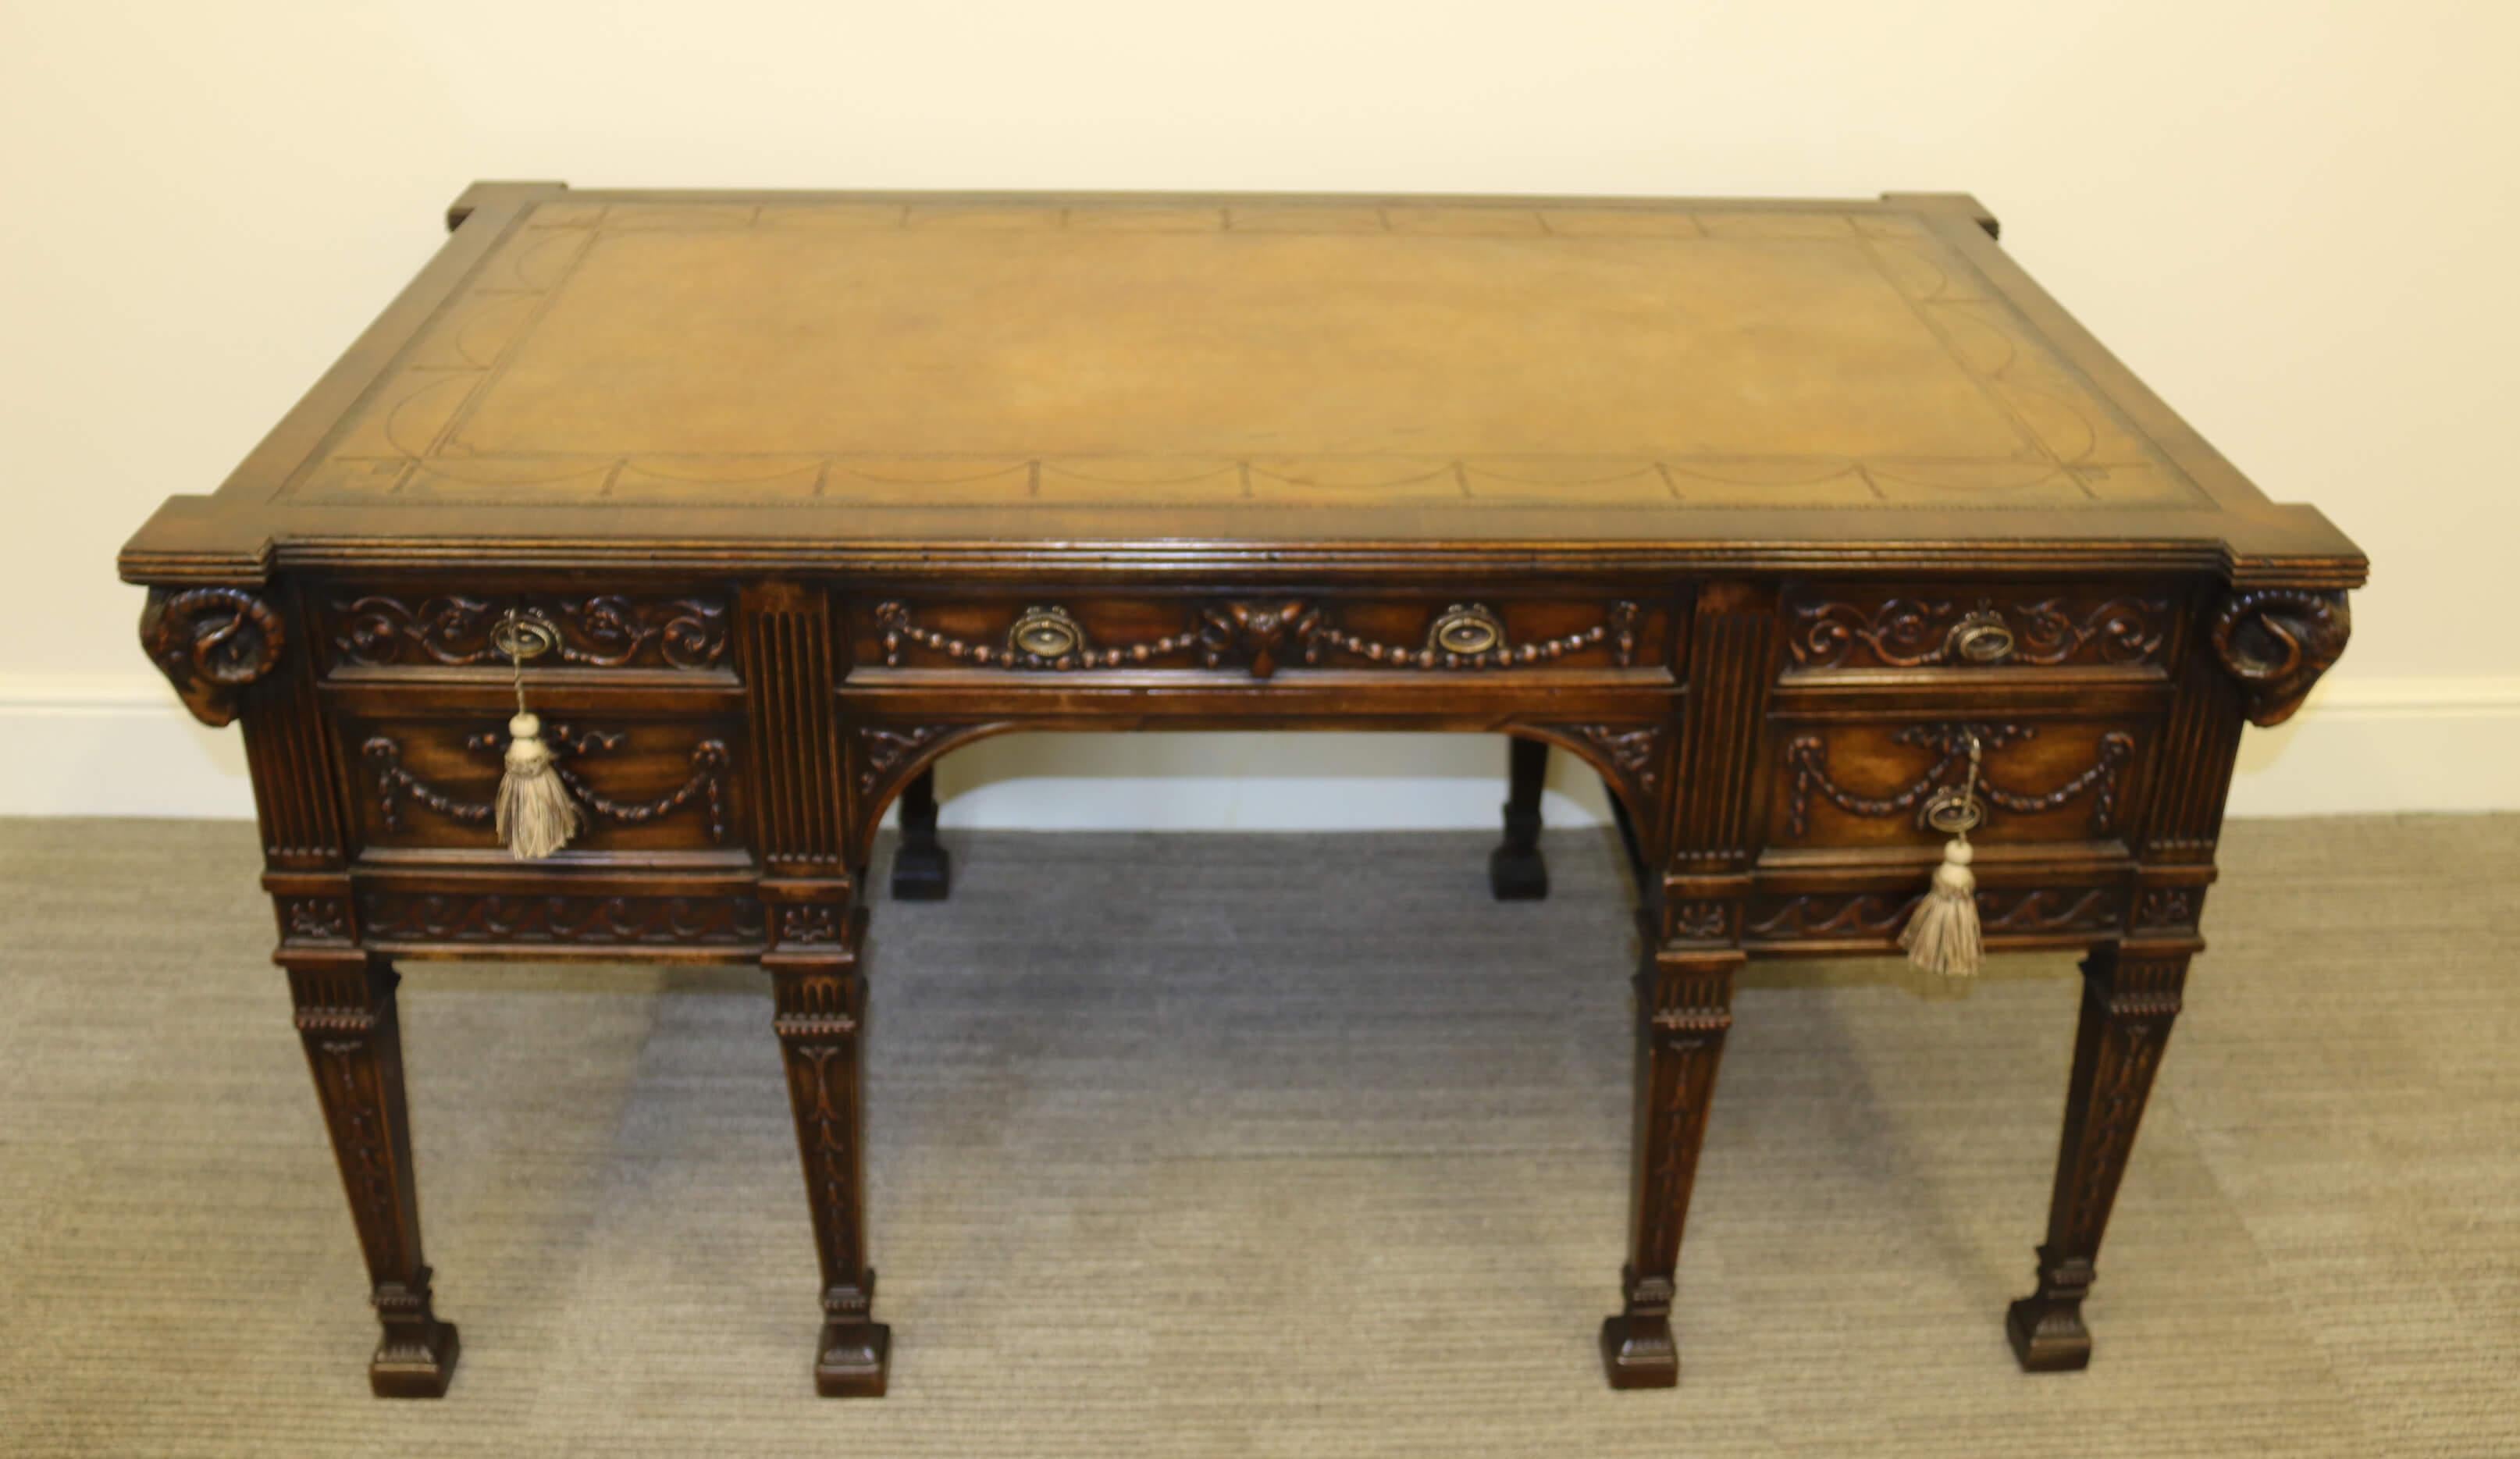 This highly impressive freestanding desk is made in mahogany to an 18th century Robert Adam design. It was made in the late 19th century by the Irish firm of cabinet makers M. Butler of Dublin. It is a very luxurious piece with highly decorative